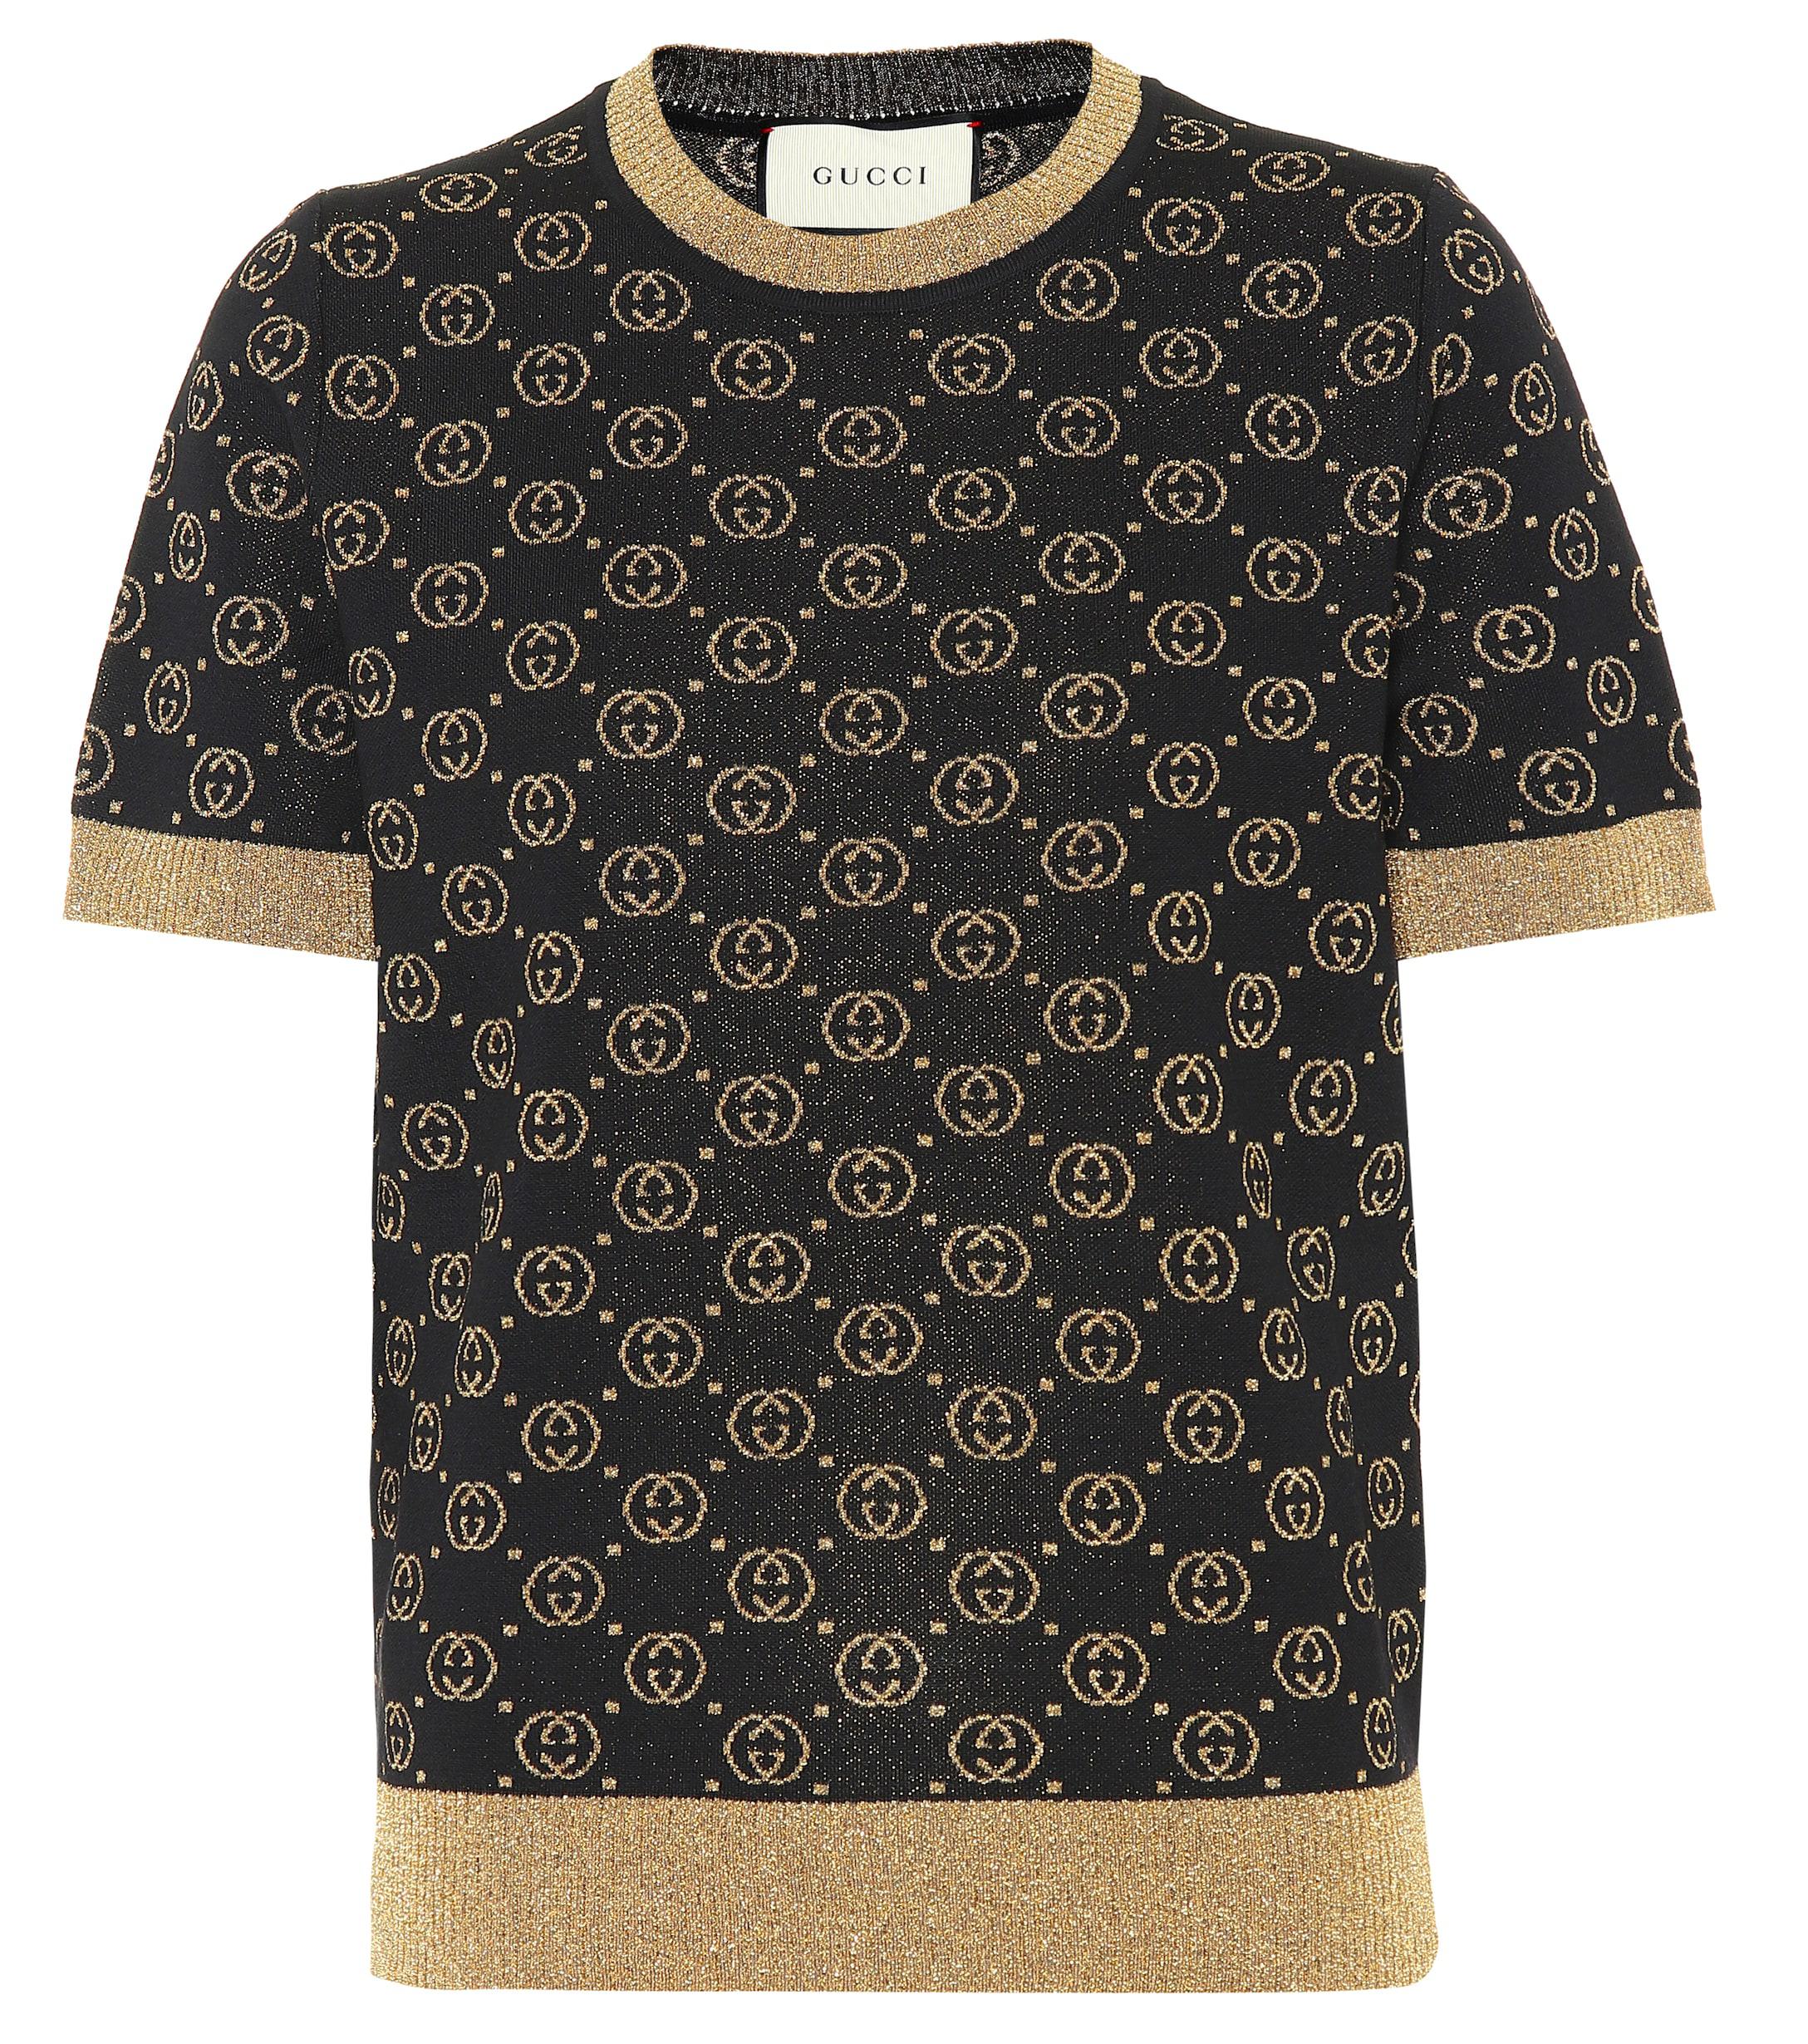 Gucci GG Wool-blend Sweater in Black,Gold (Black) - Save 1% - Lyst